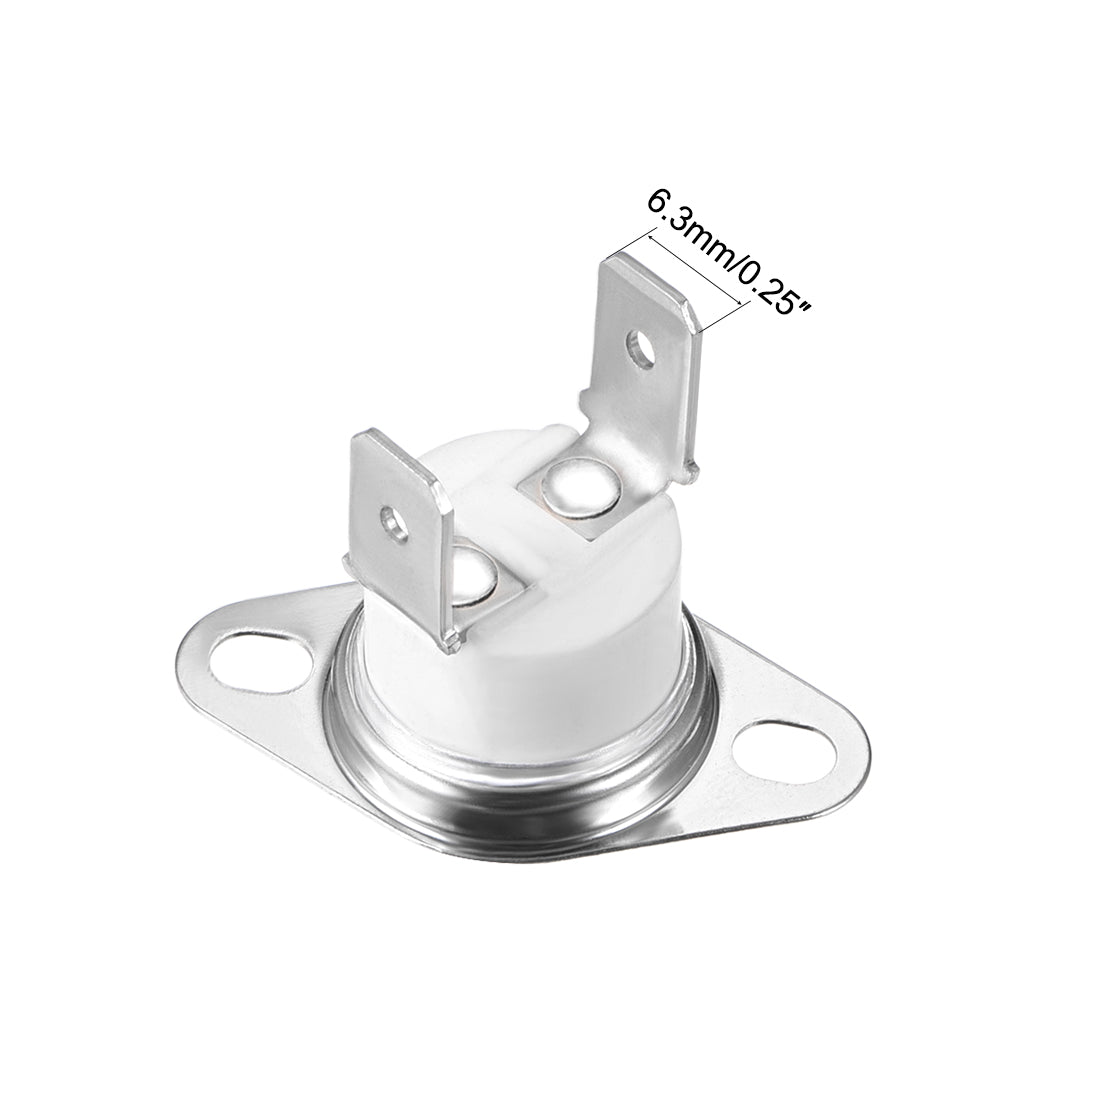 uxcell Uxcell Temperature Control Switch , Thermostat , KSD301 200°C , 10A , Normally Closed N.C 2pcs